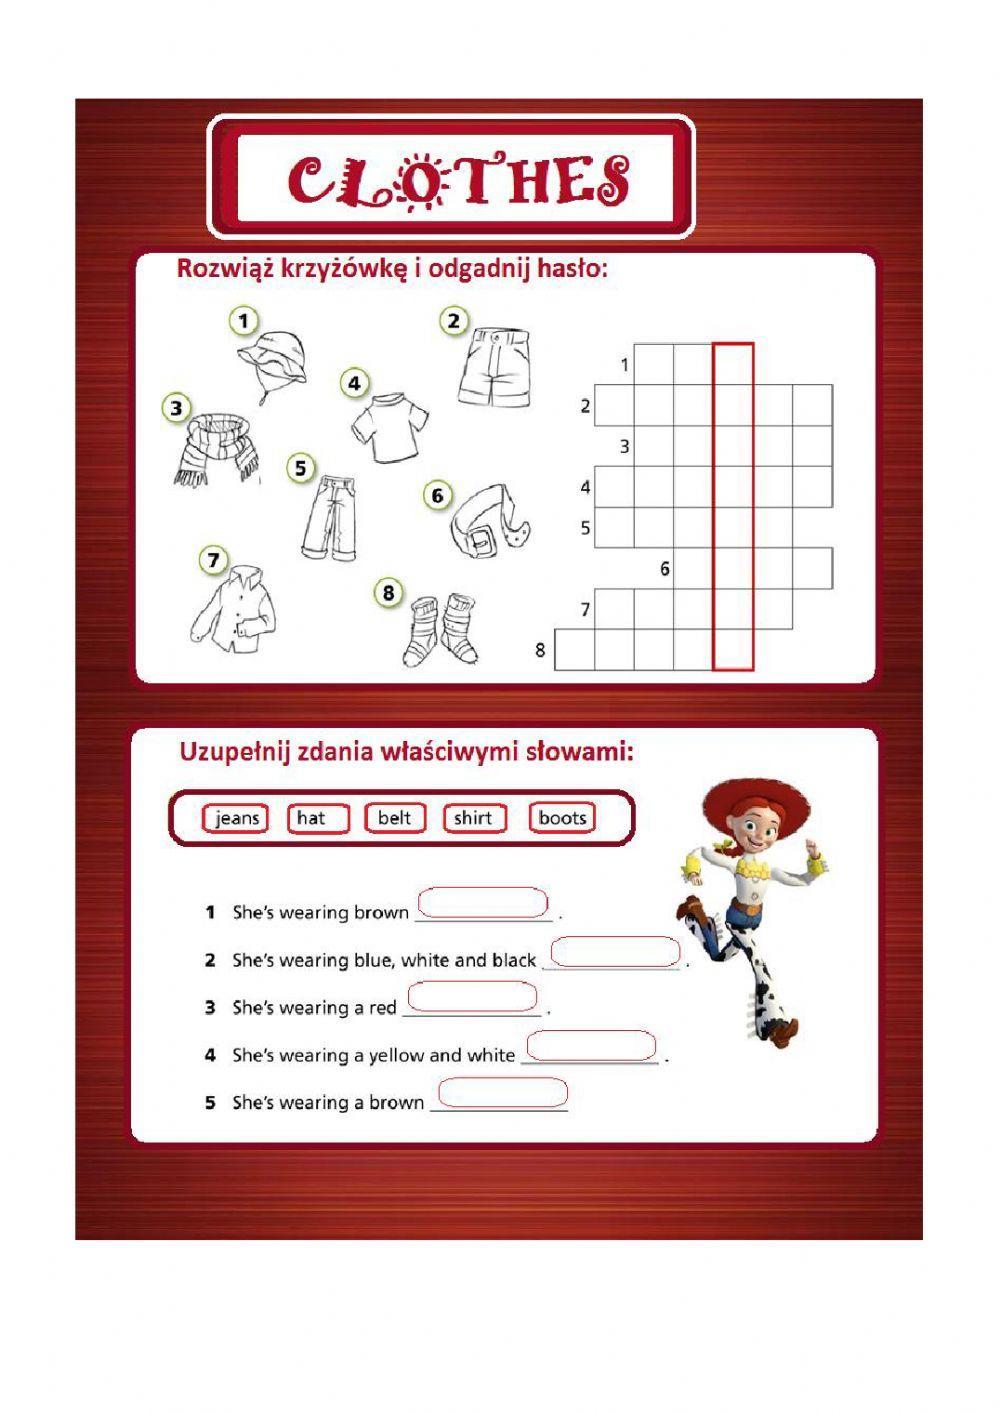 Clothes online exercise for grade 2